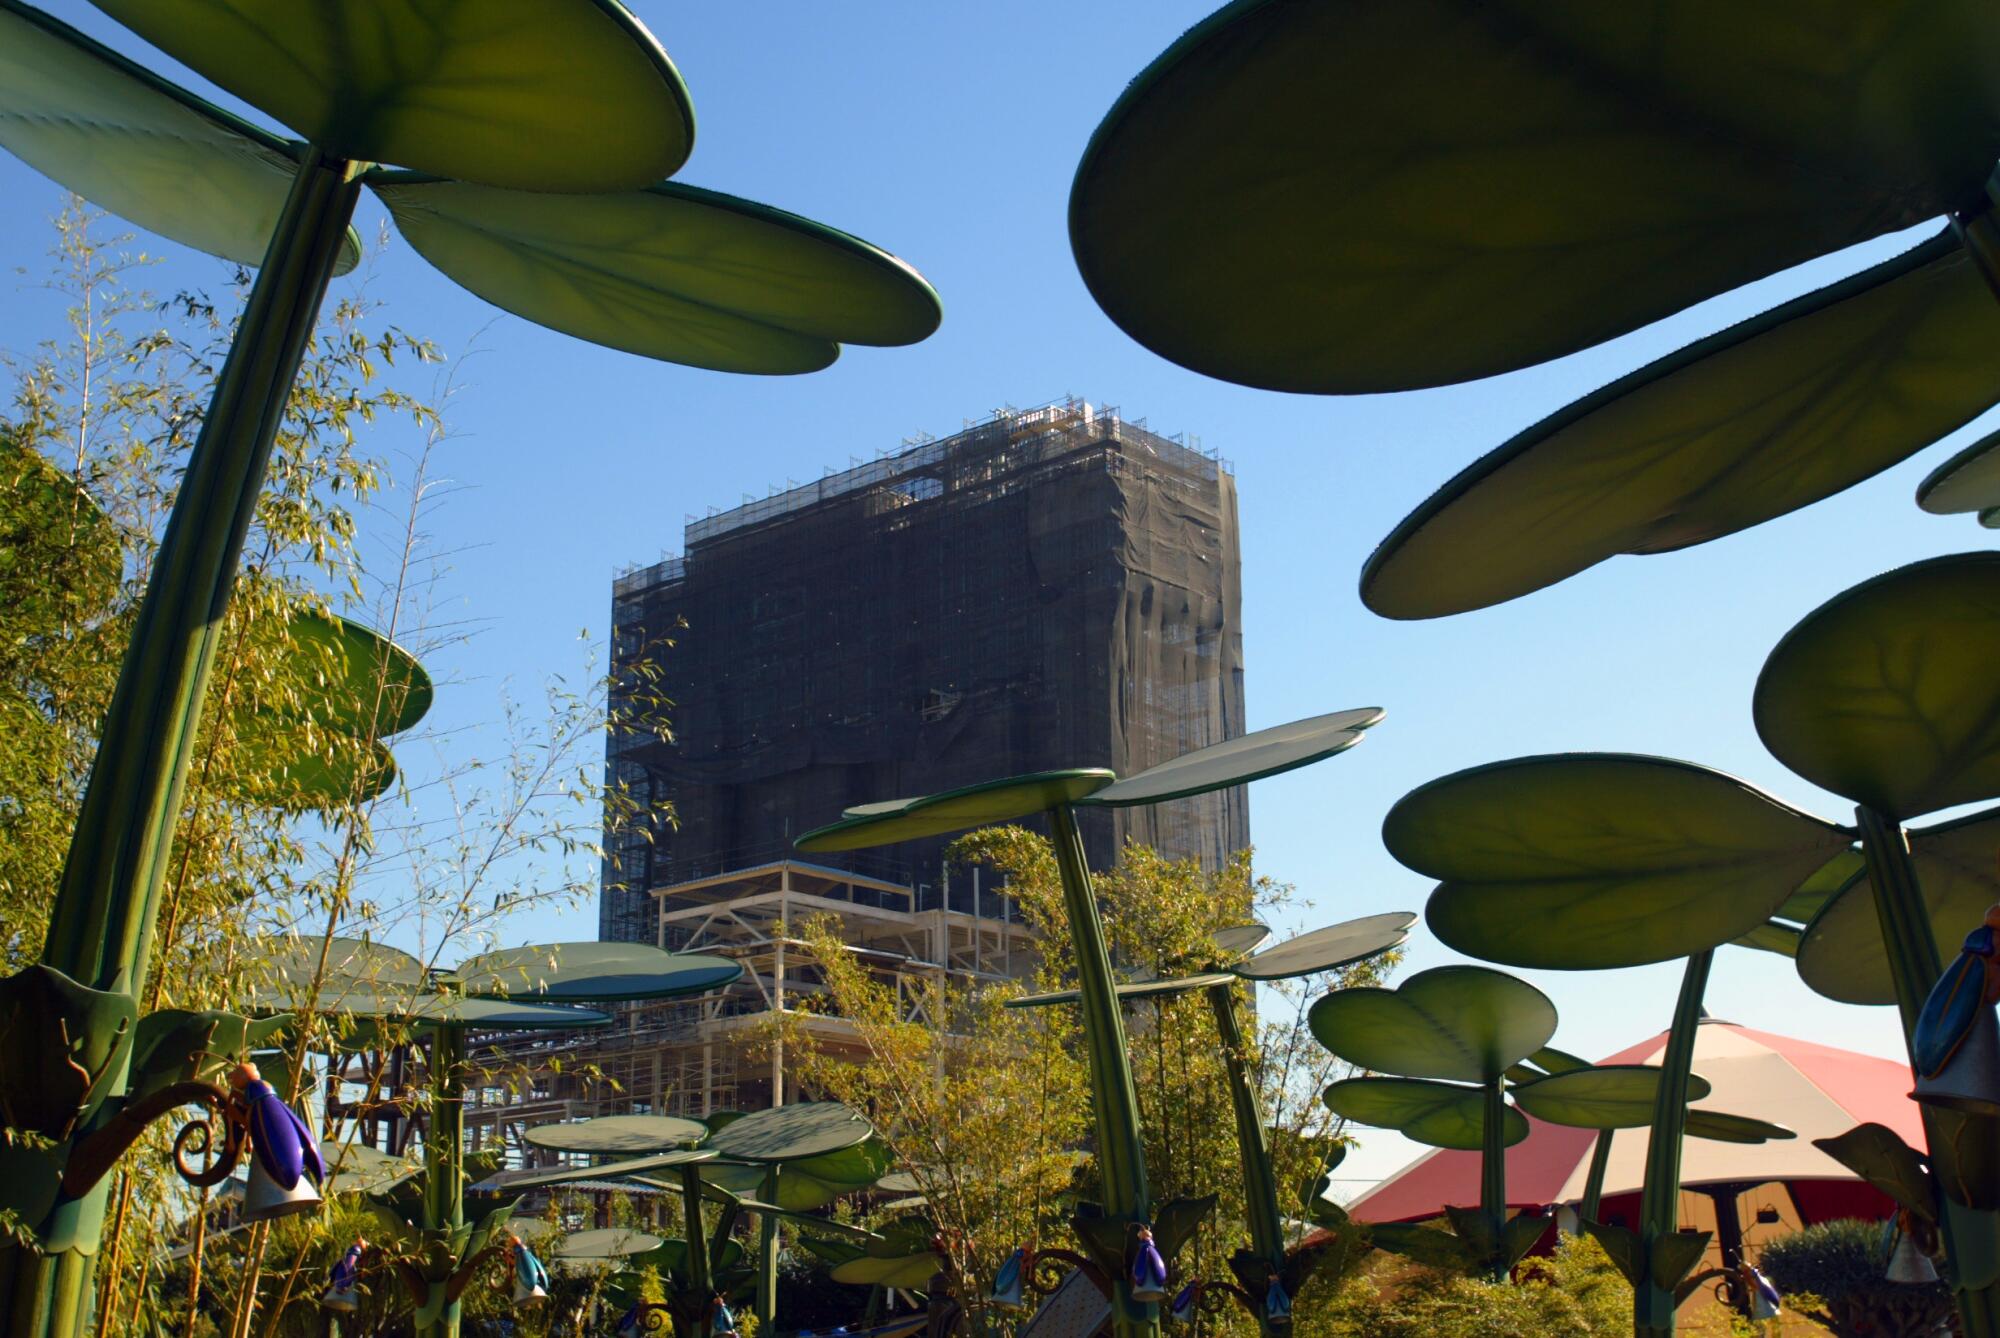 A photo of a tall structure wrapped in construction mesh, seen through giant plants.